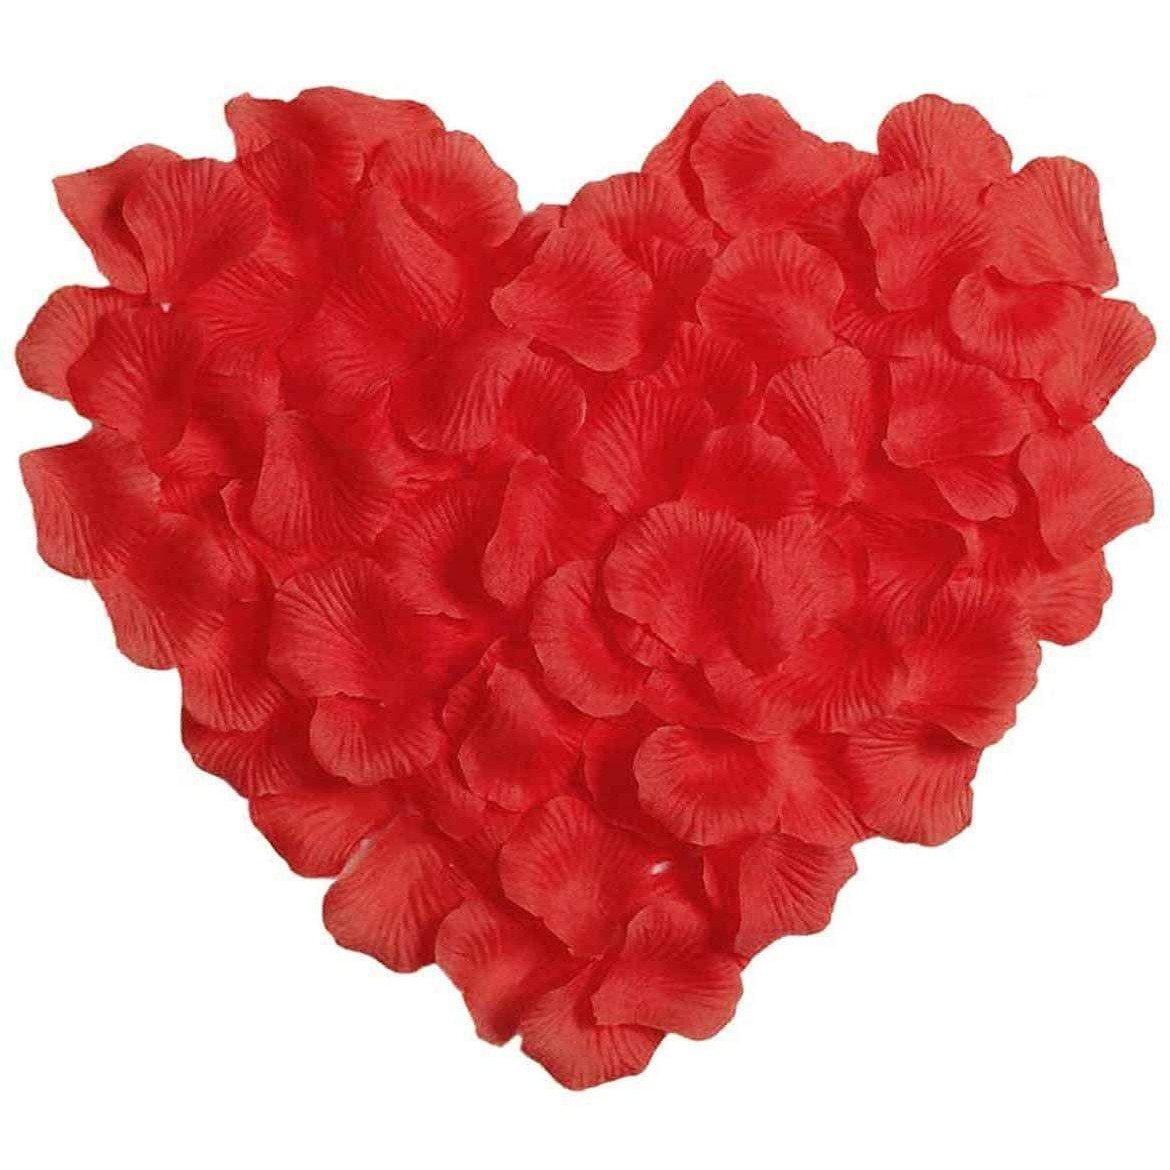 200pcs Red Silk Rose Petals Wedding Mothers Day Wedding Confetti Anniversary Table Decorations - image 1